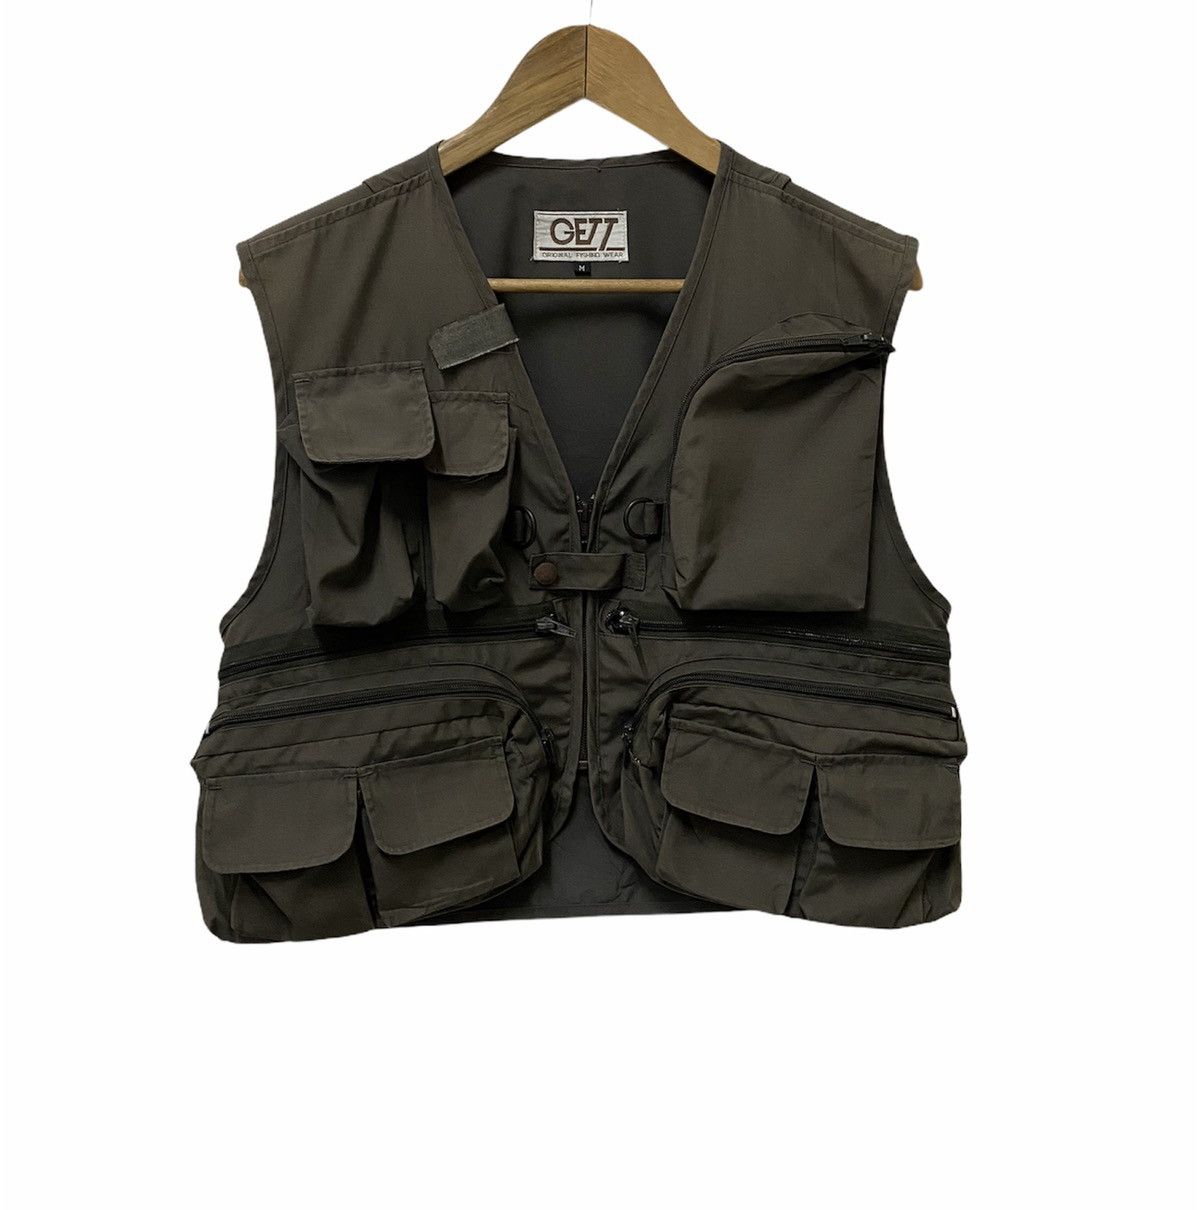 Men's Cabela's Fishing Vest and Willis & Geiger Outfitters Fatigue